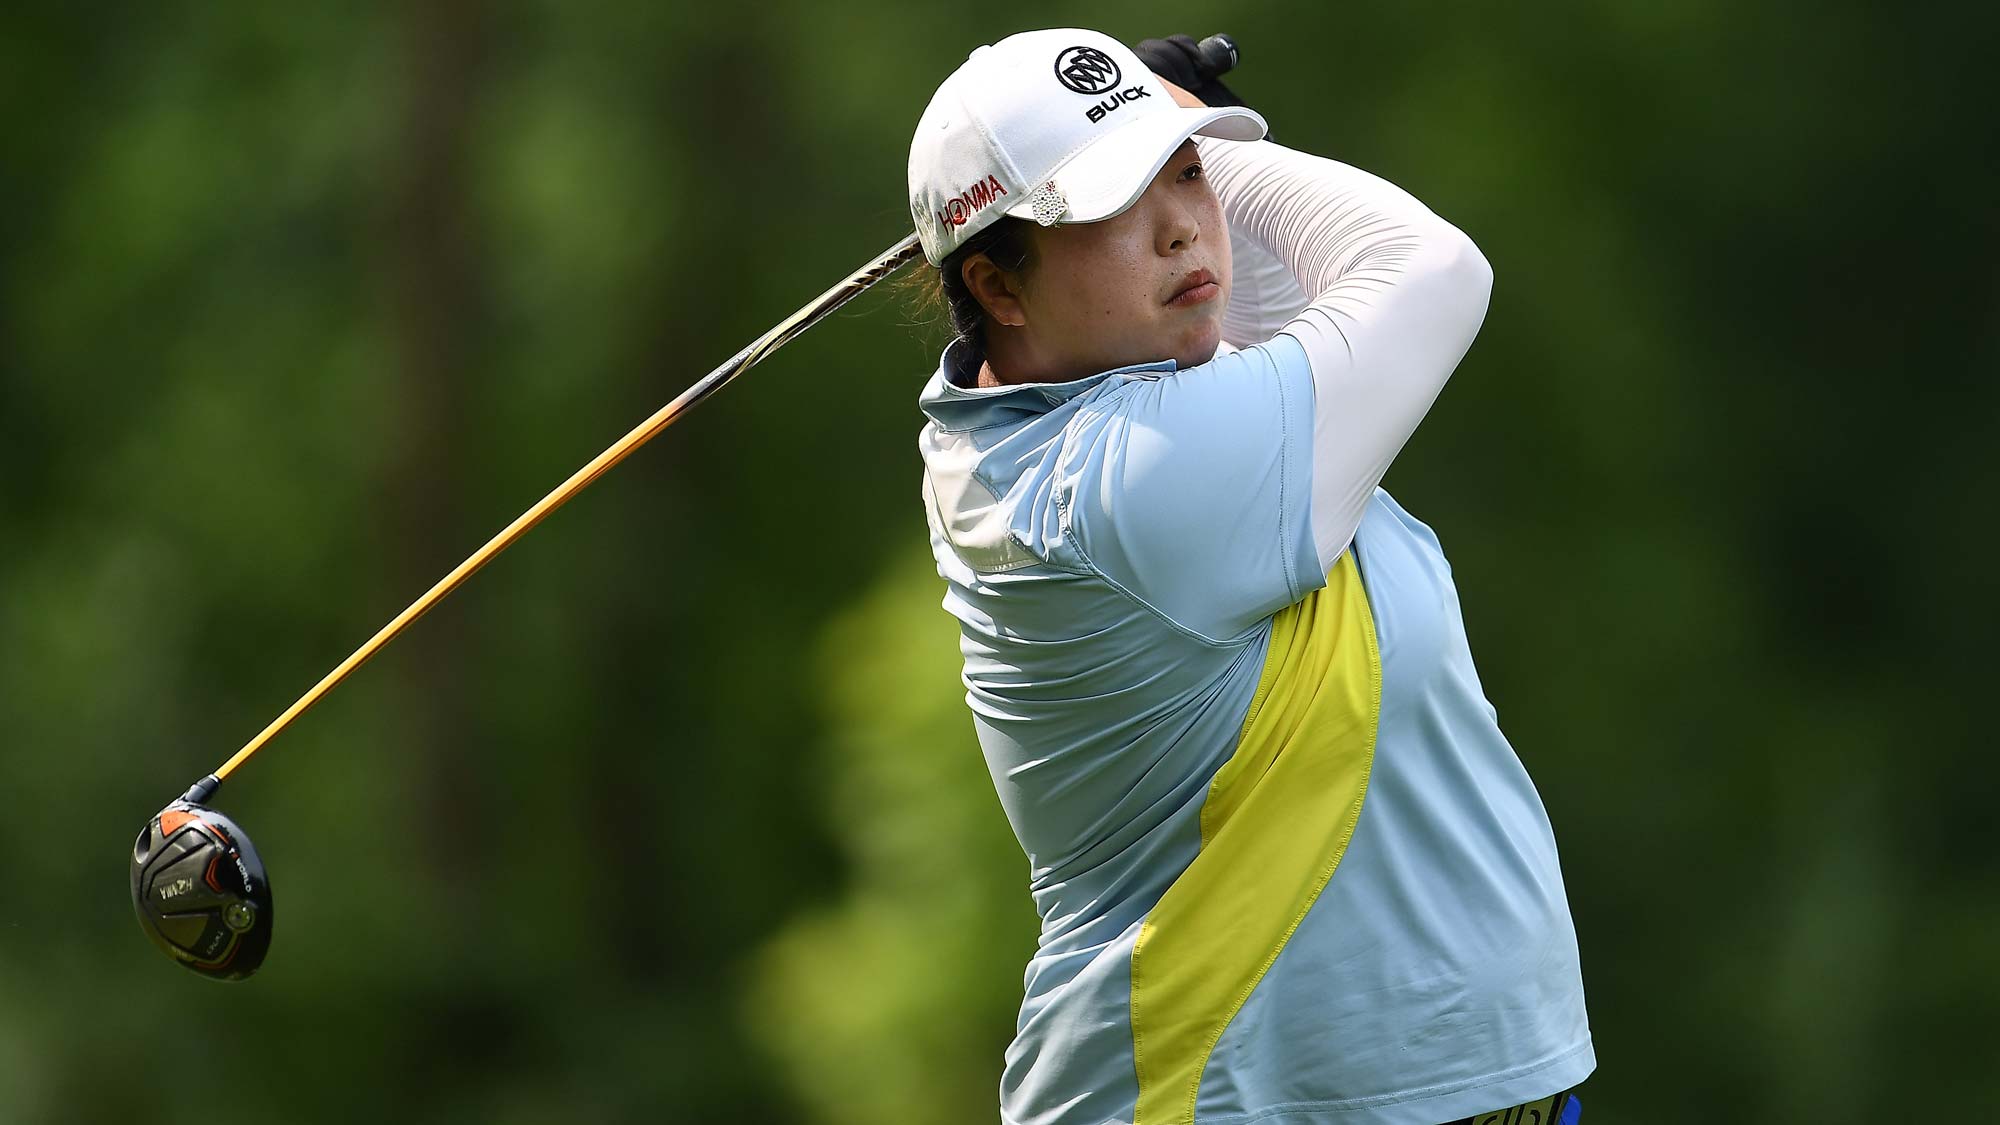 Shanshan Feng of China hits her tee shot on the third hole during the final round of the Thornberry Creek LPGA Classic